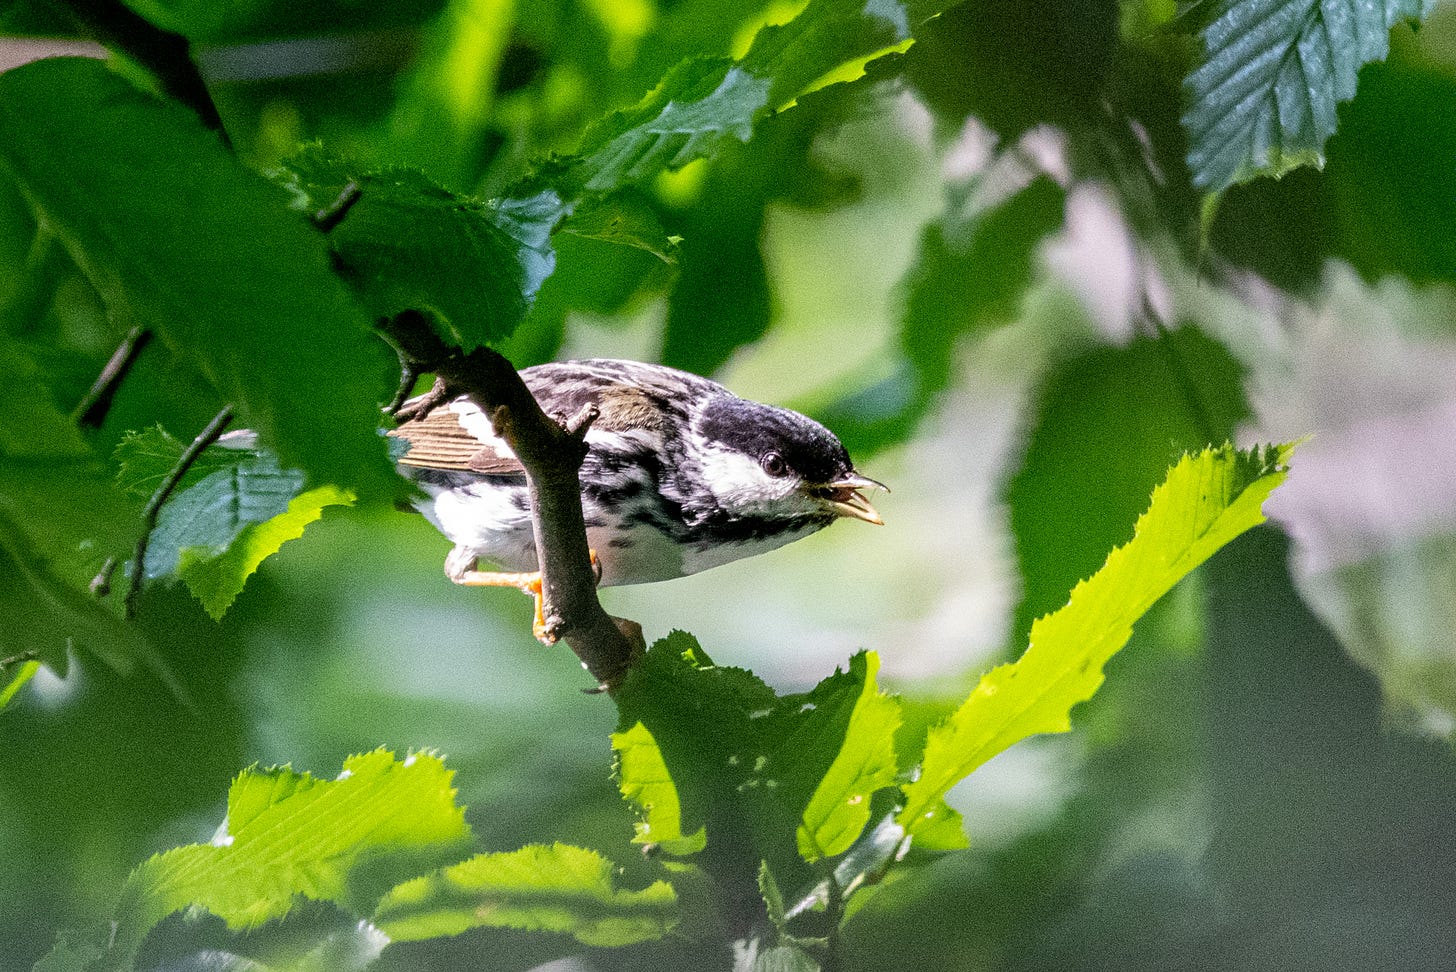 A blackpoll warbler in a horizontal posture, bill open in song